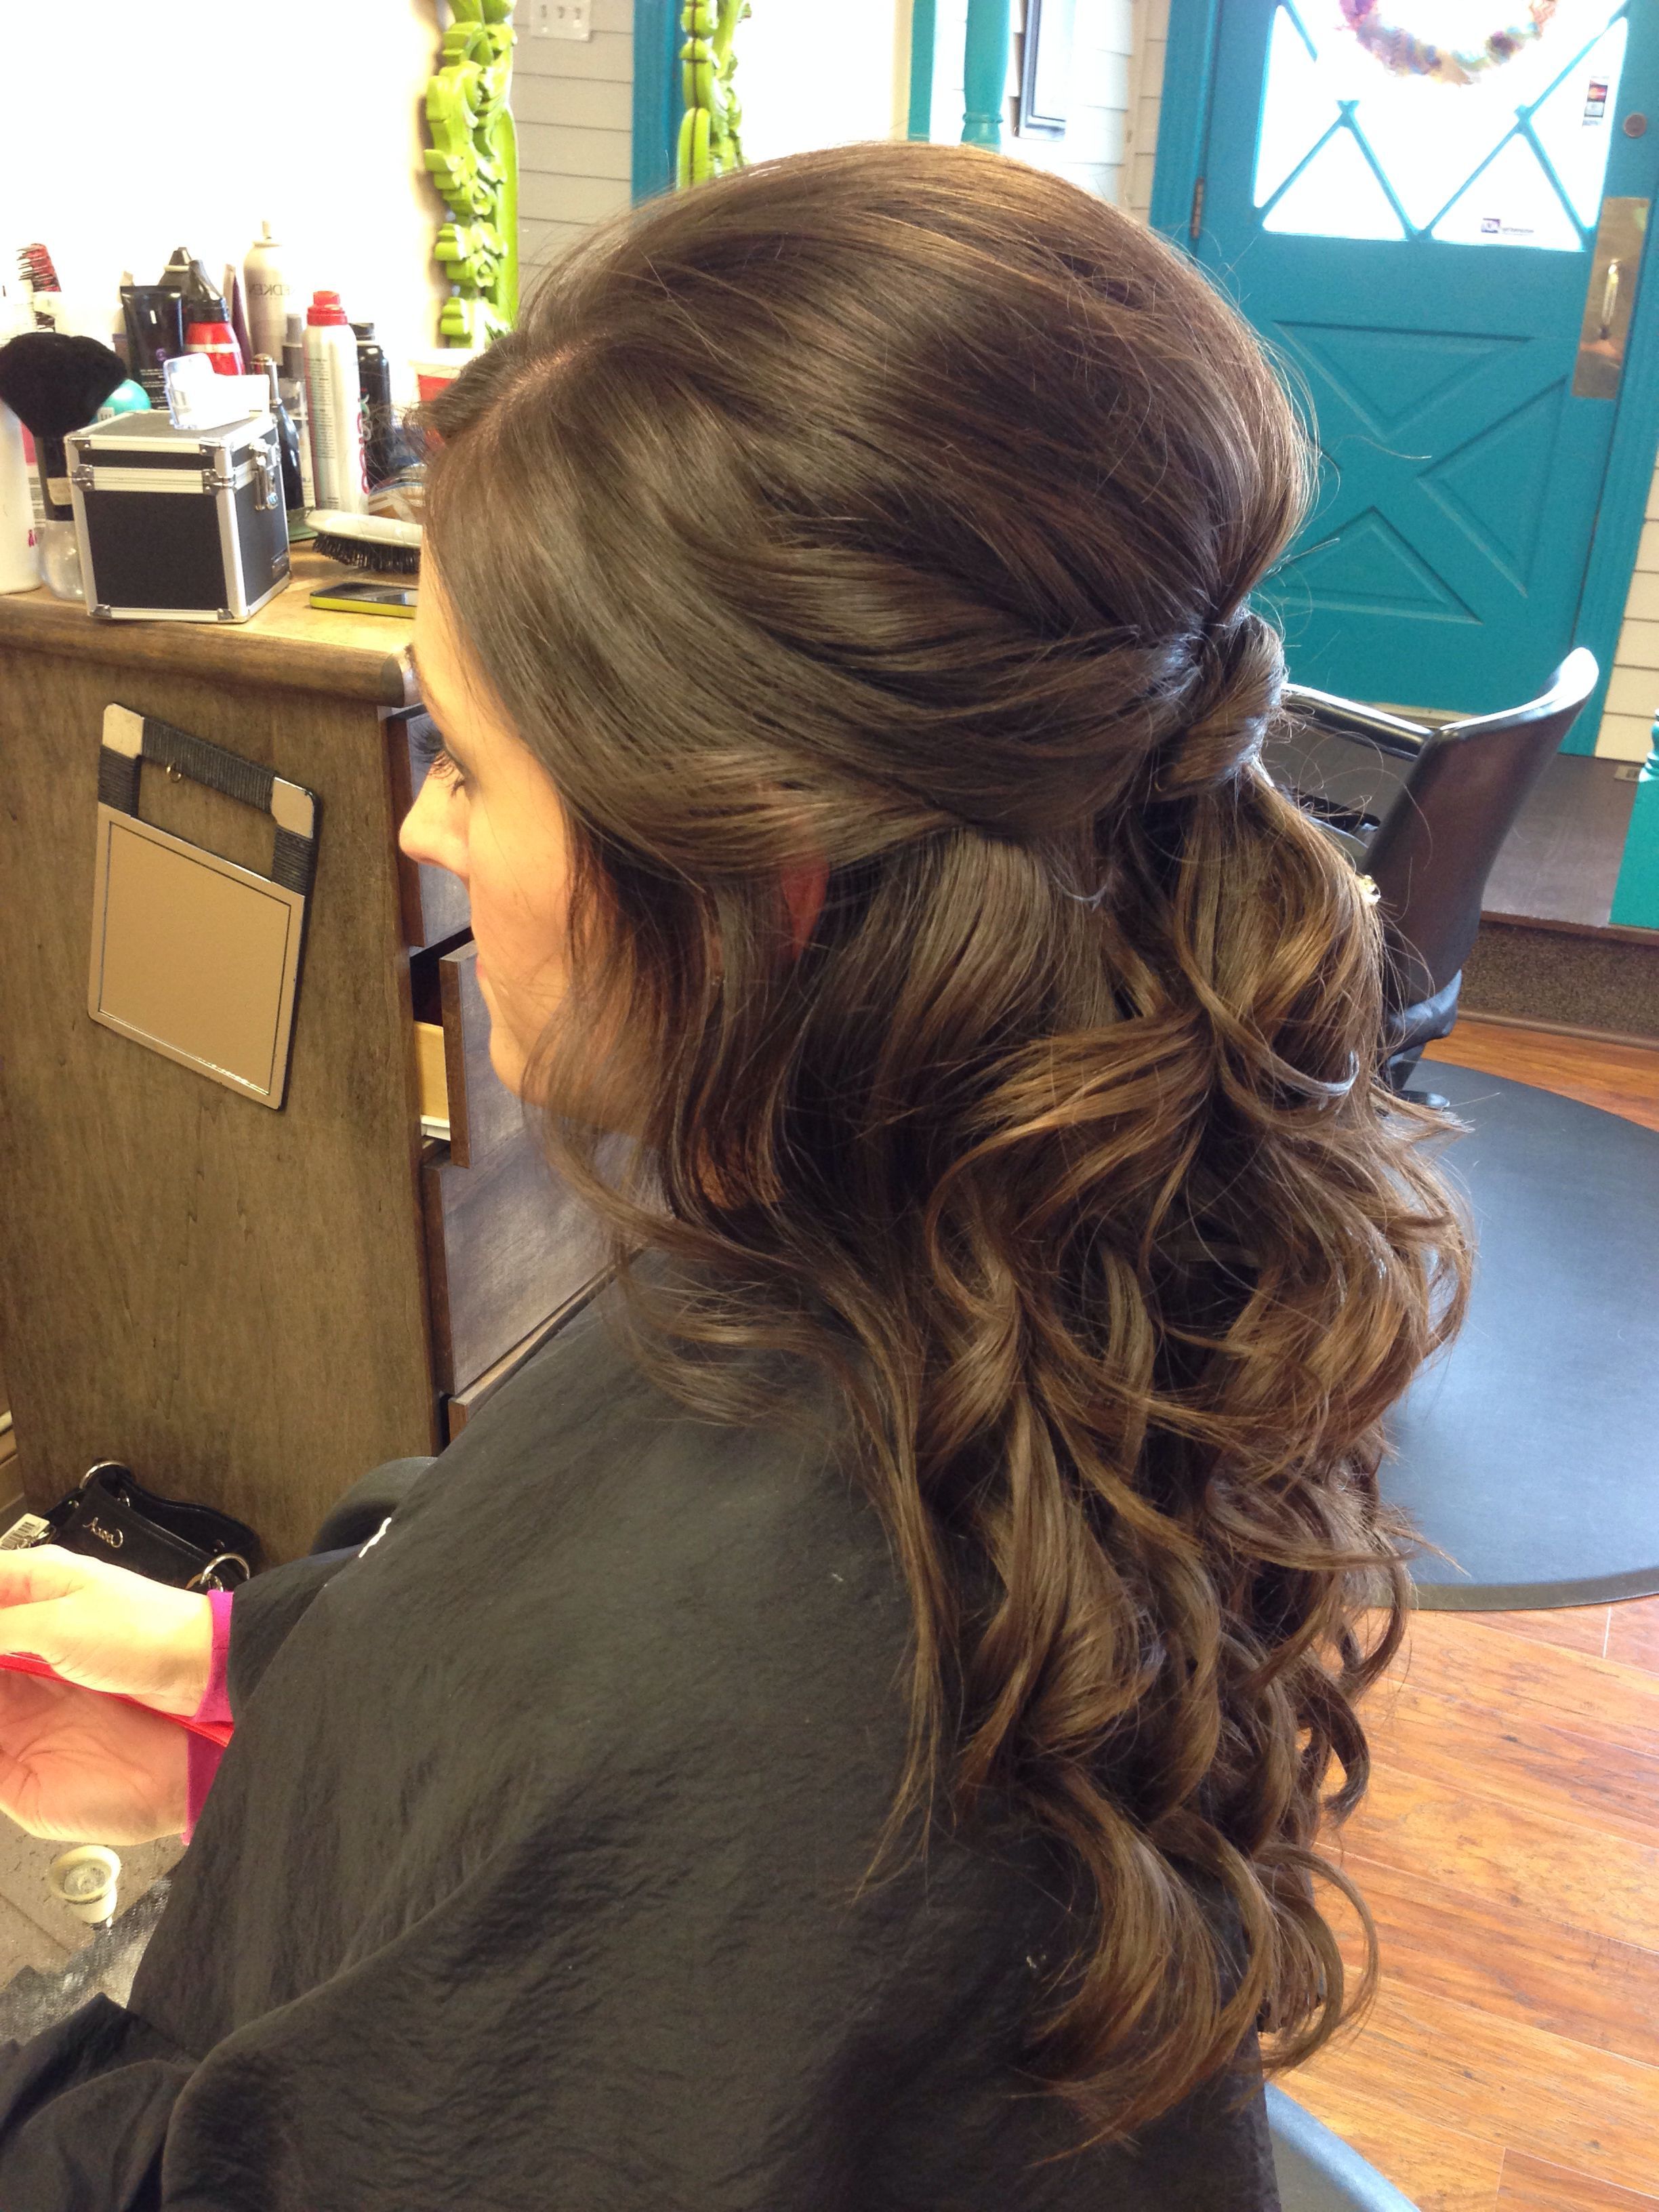 Wedding Regarding Well Known Veiled Bump Bridal Hairstyles With Waves (View 18 of 20)